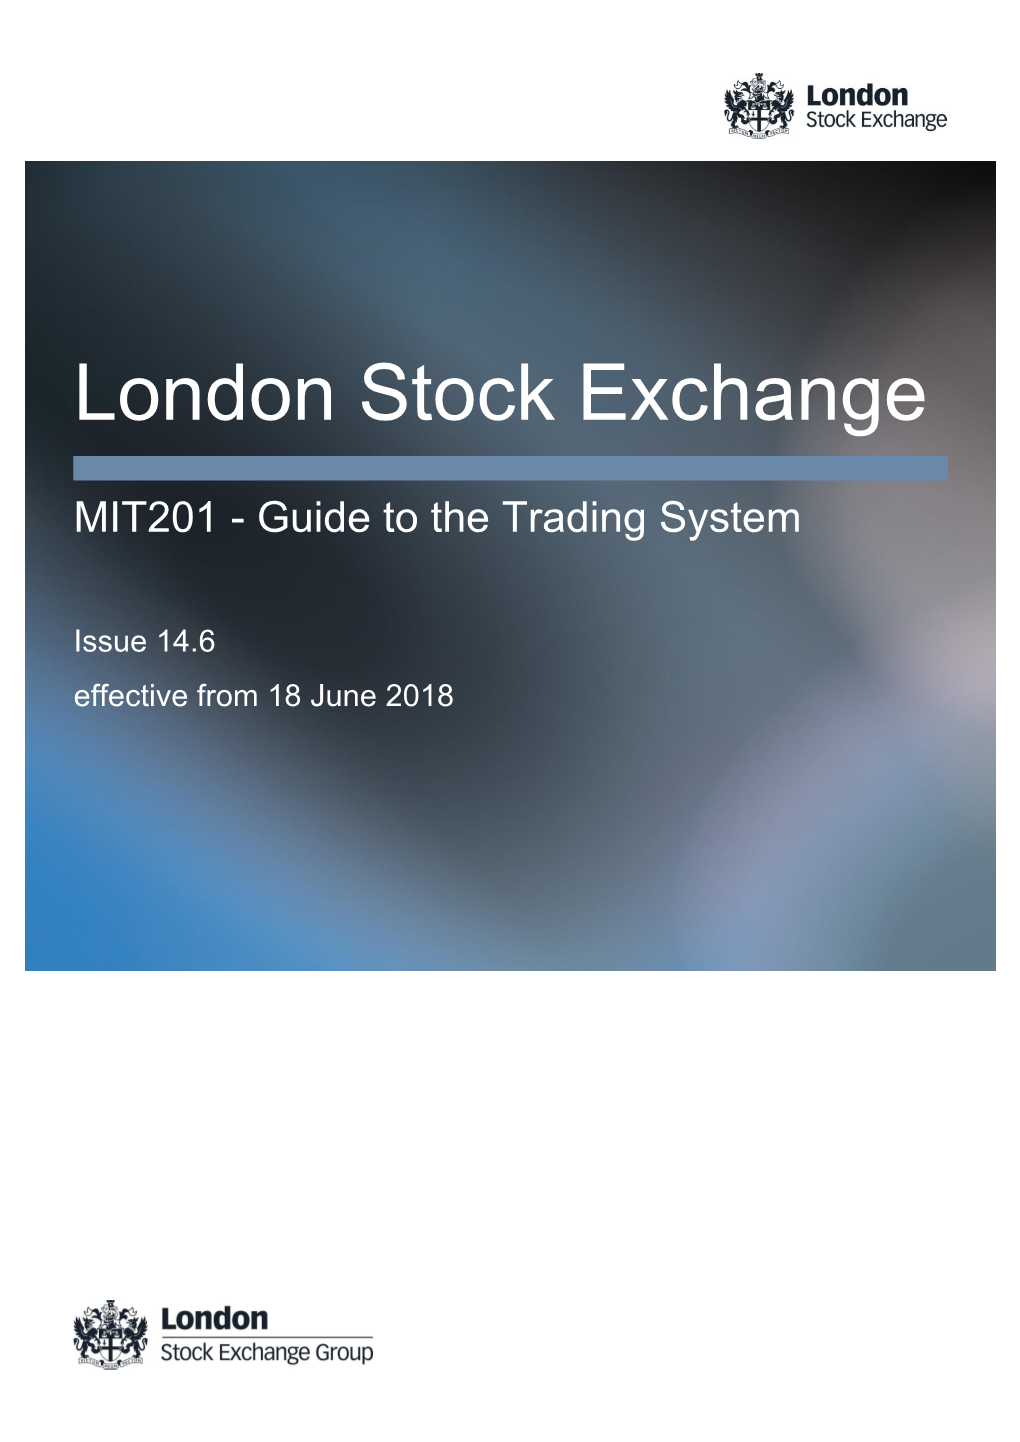 MIT201 - Guide to the Trading System